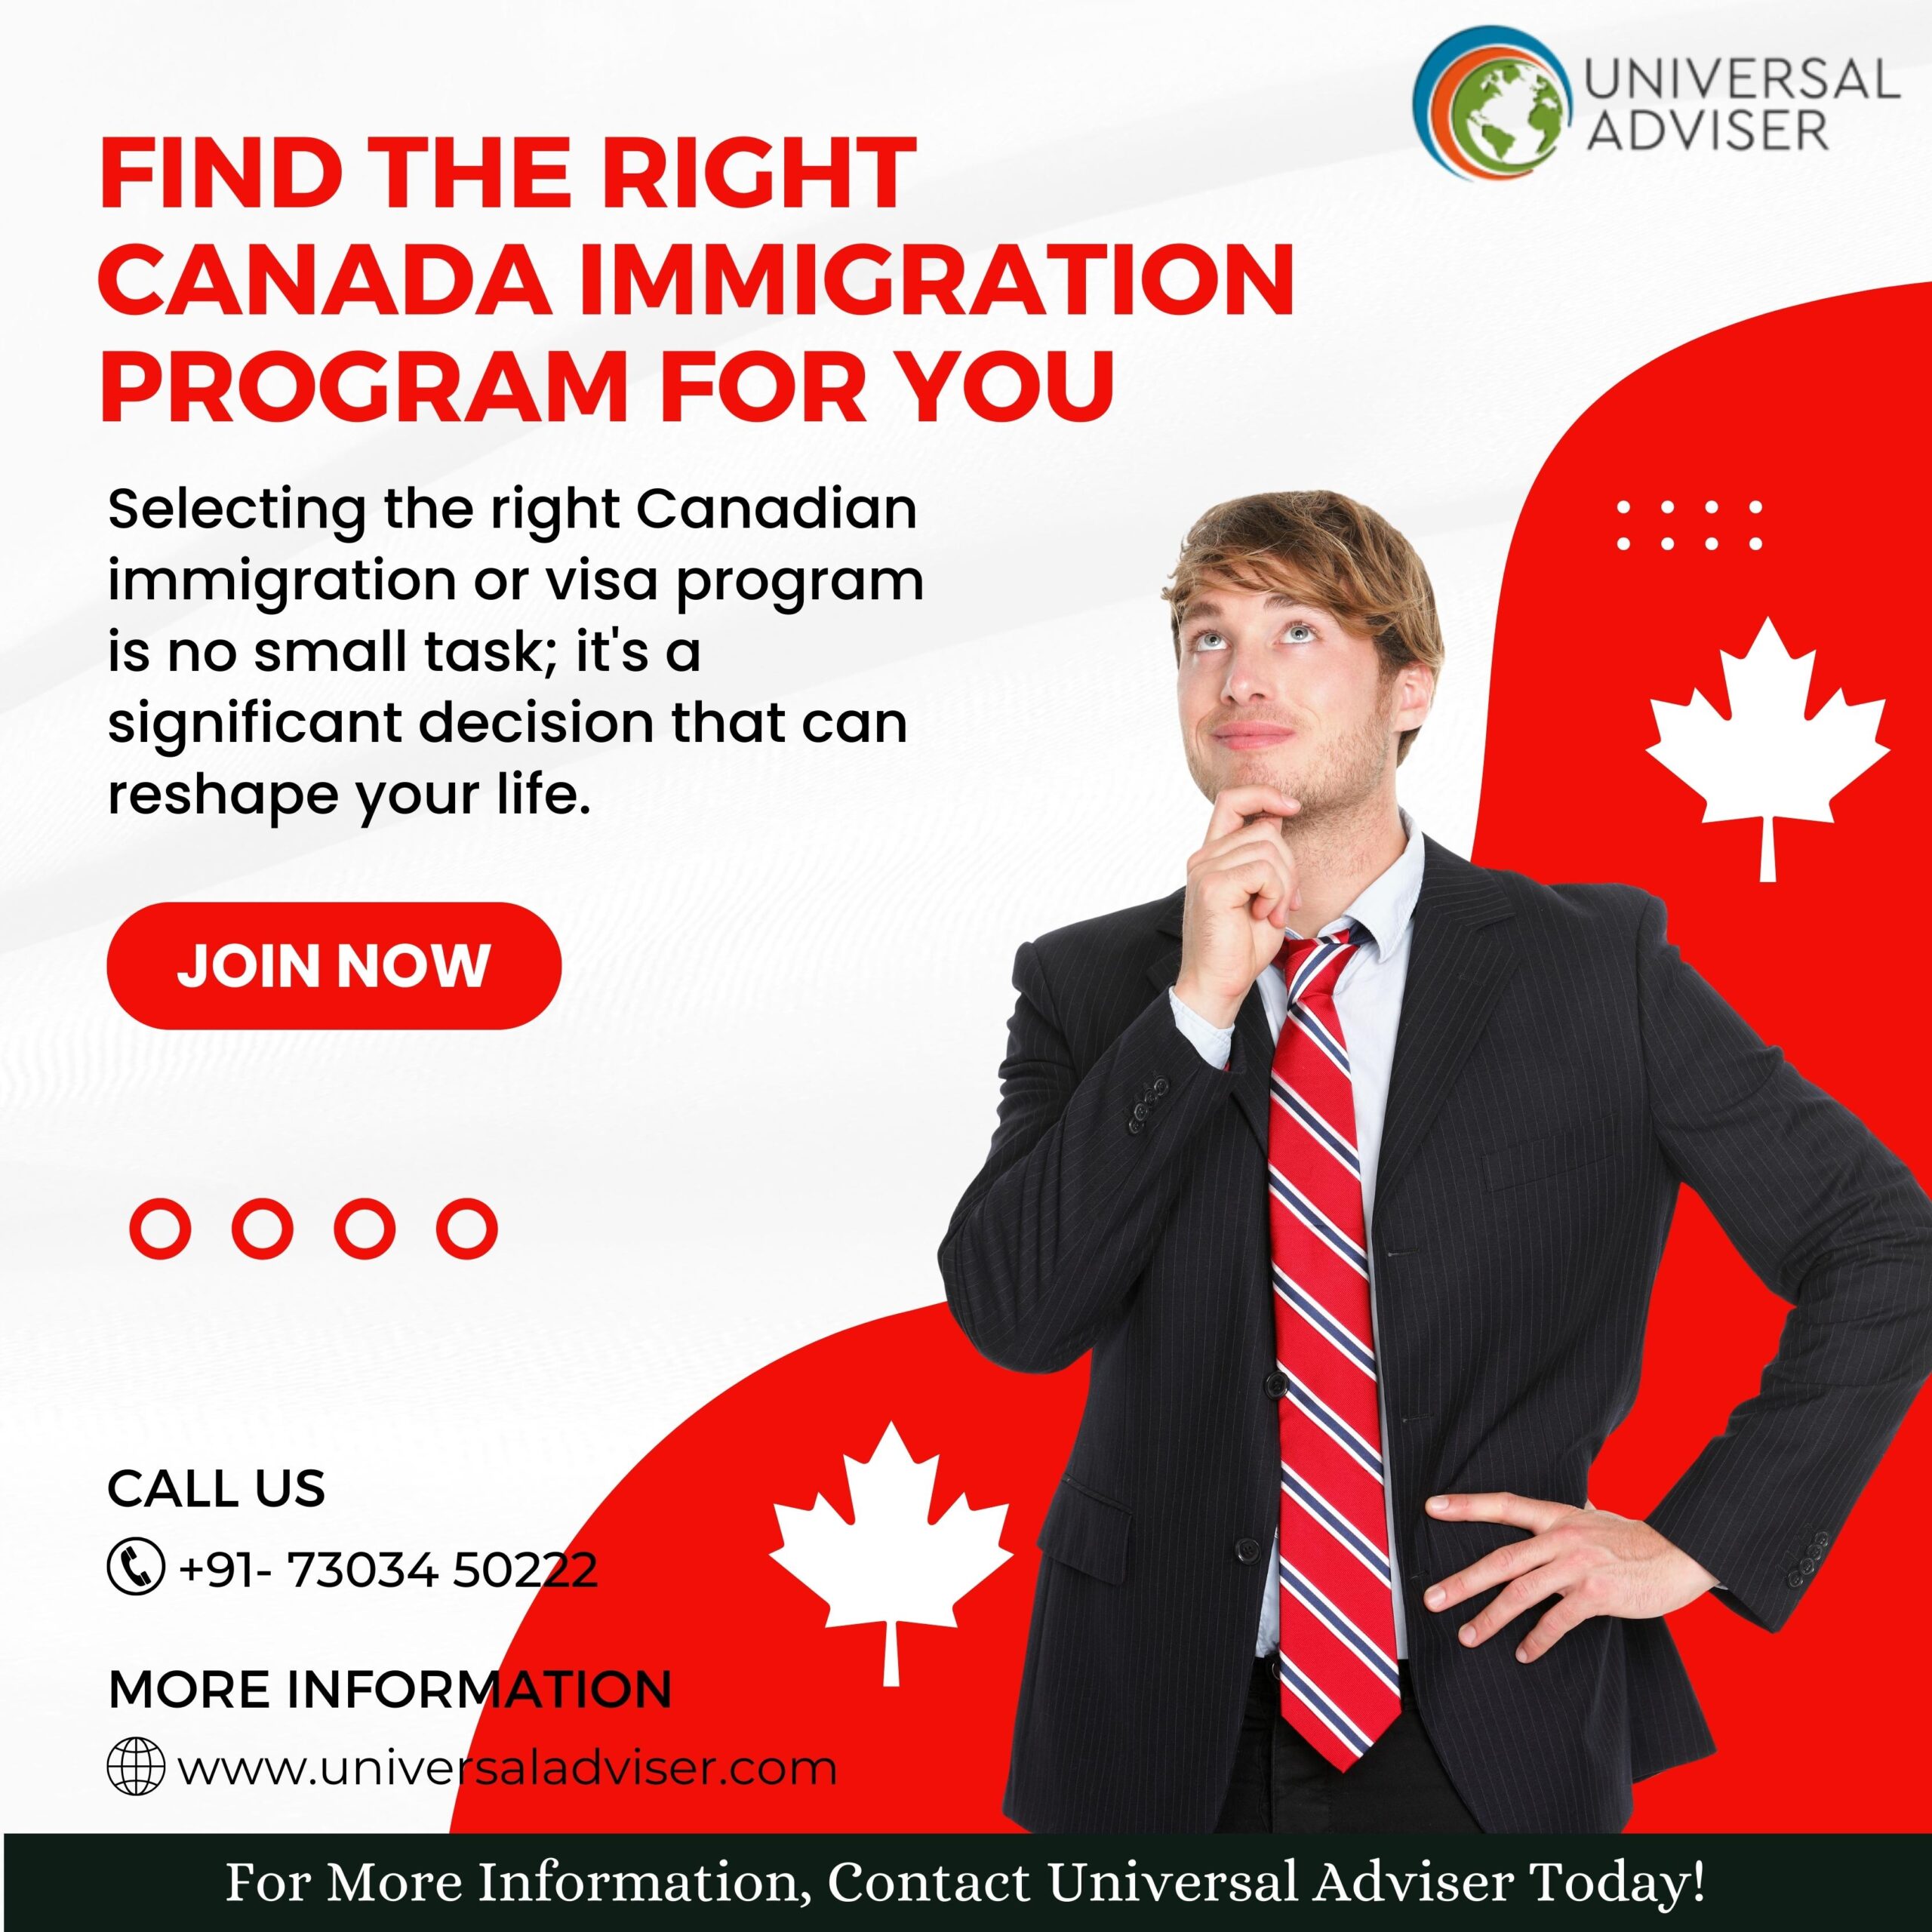 Here Are 13 Ways You Can Immigrate To Canada In 2023 - Canada Immigration  and Visa Information. Canadian Immigration Services and Free Online  Evaluation.